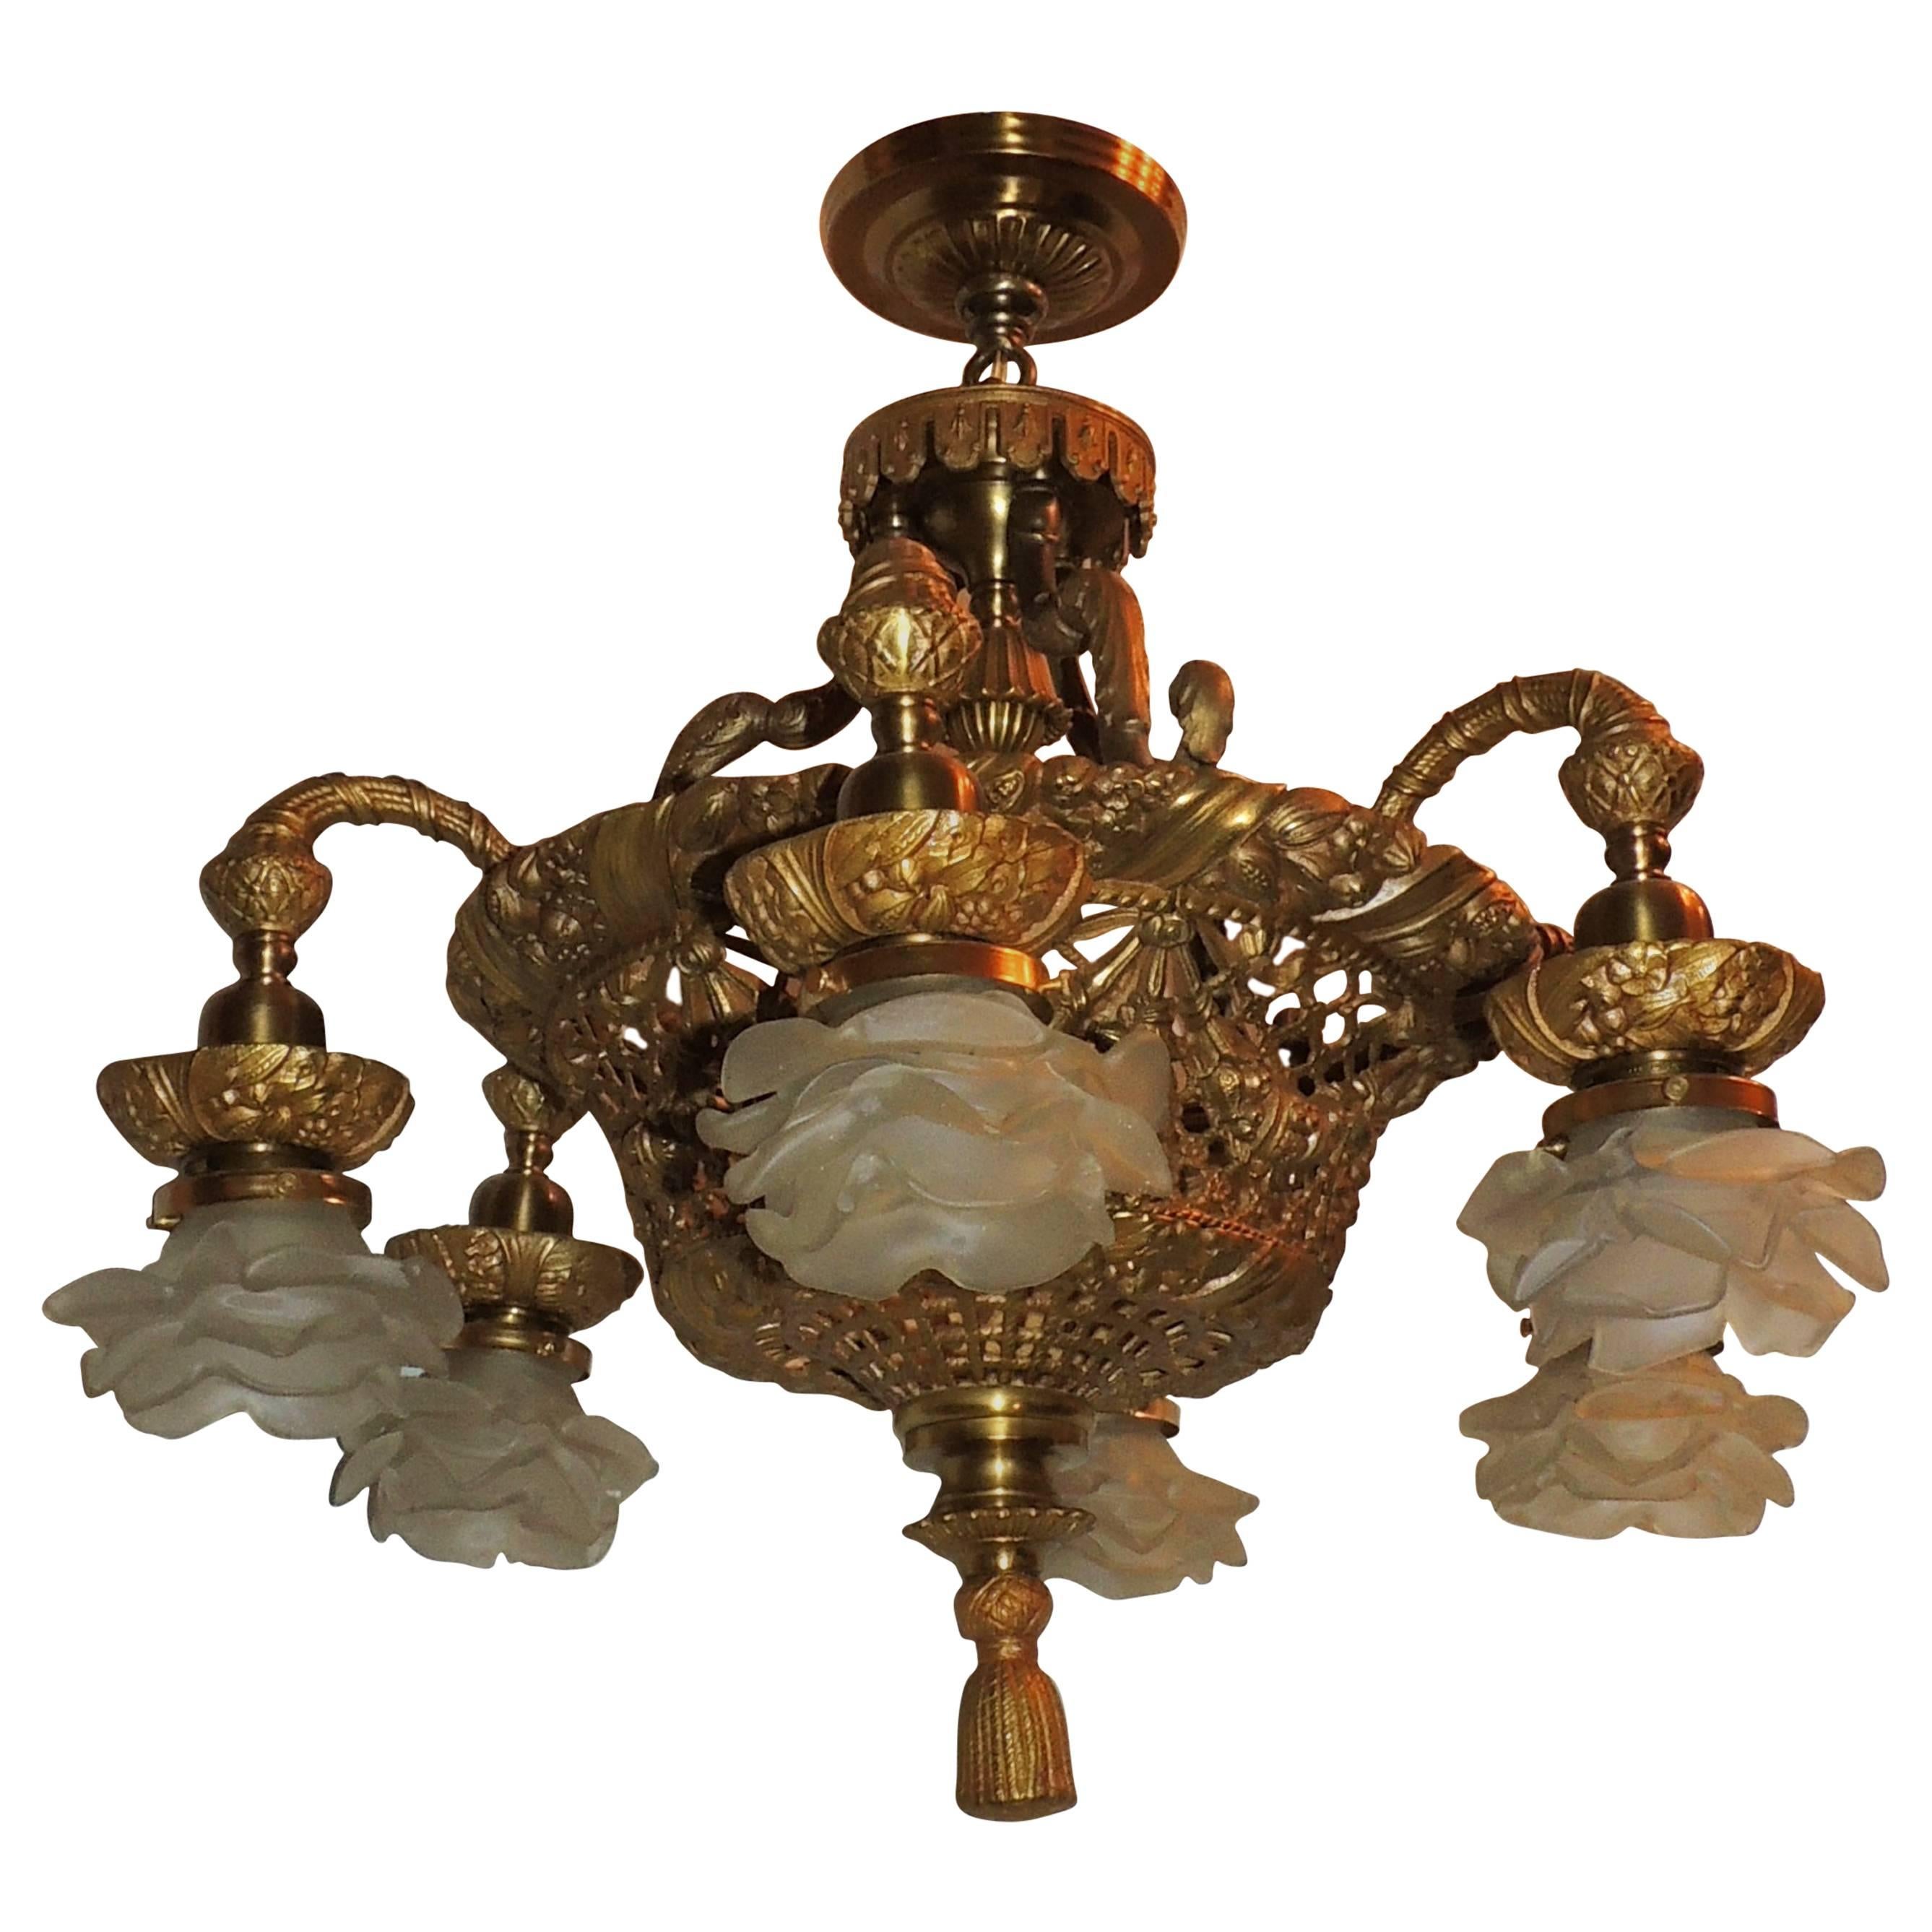 Wonderful French Dore Bronze Basket Form Pierced and Swag Chandelier Fixture